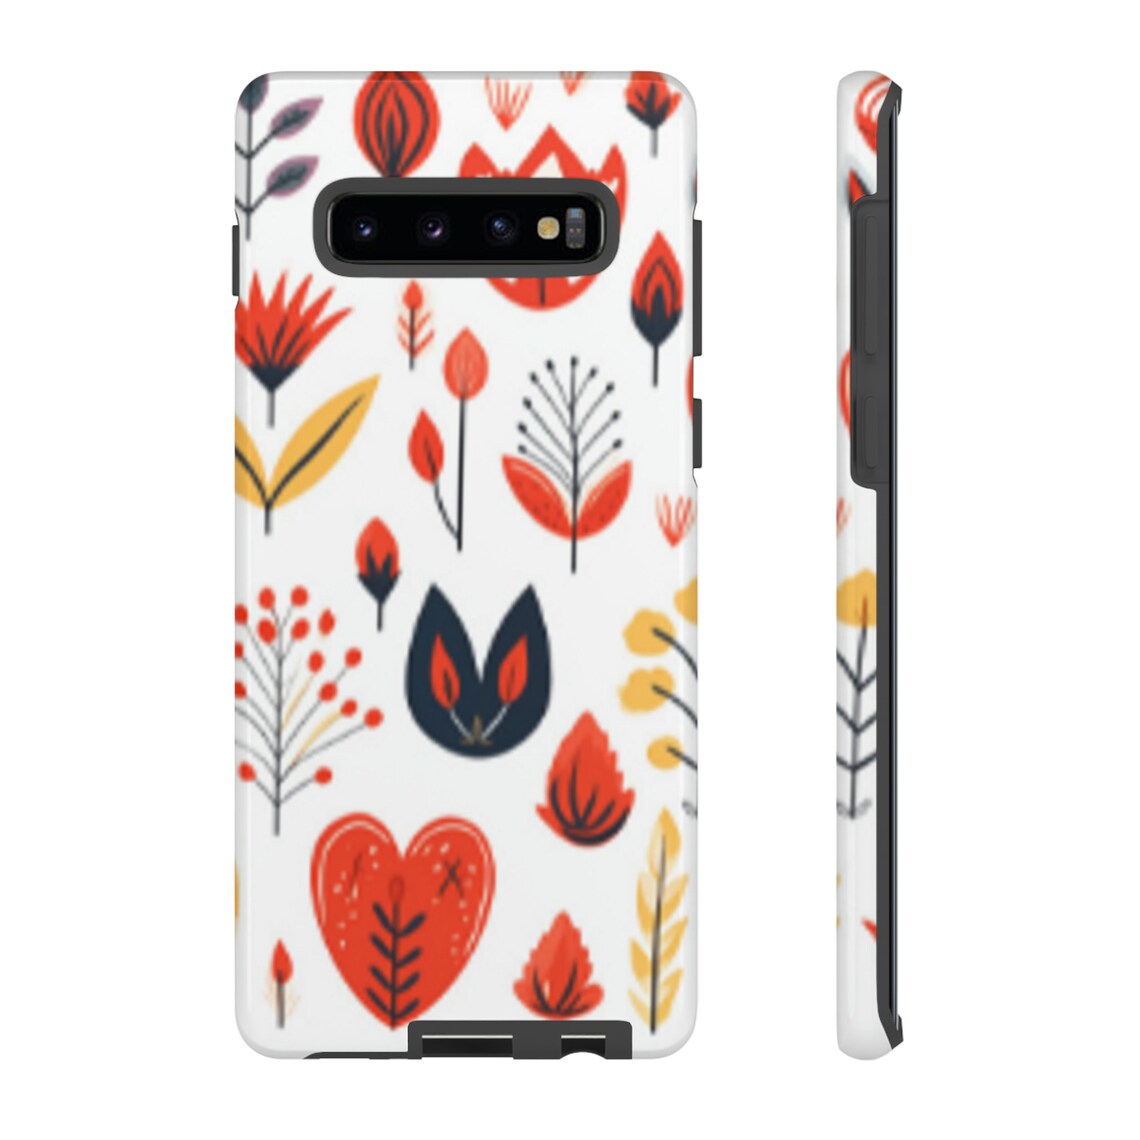 Flower and Heart Phone Case, Flower Phone Cases, Heart Phone Cases ...